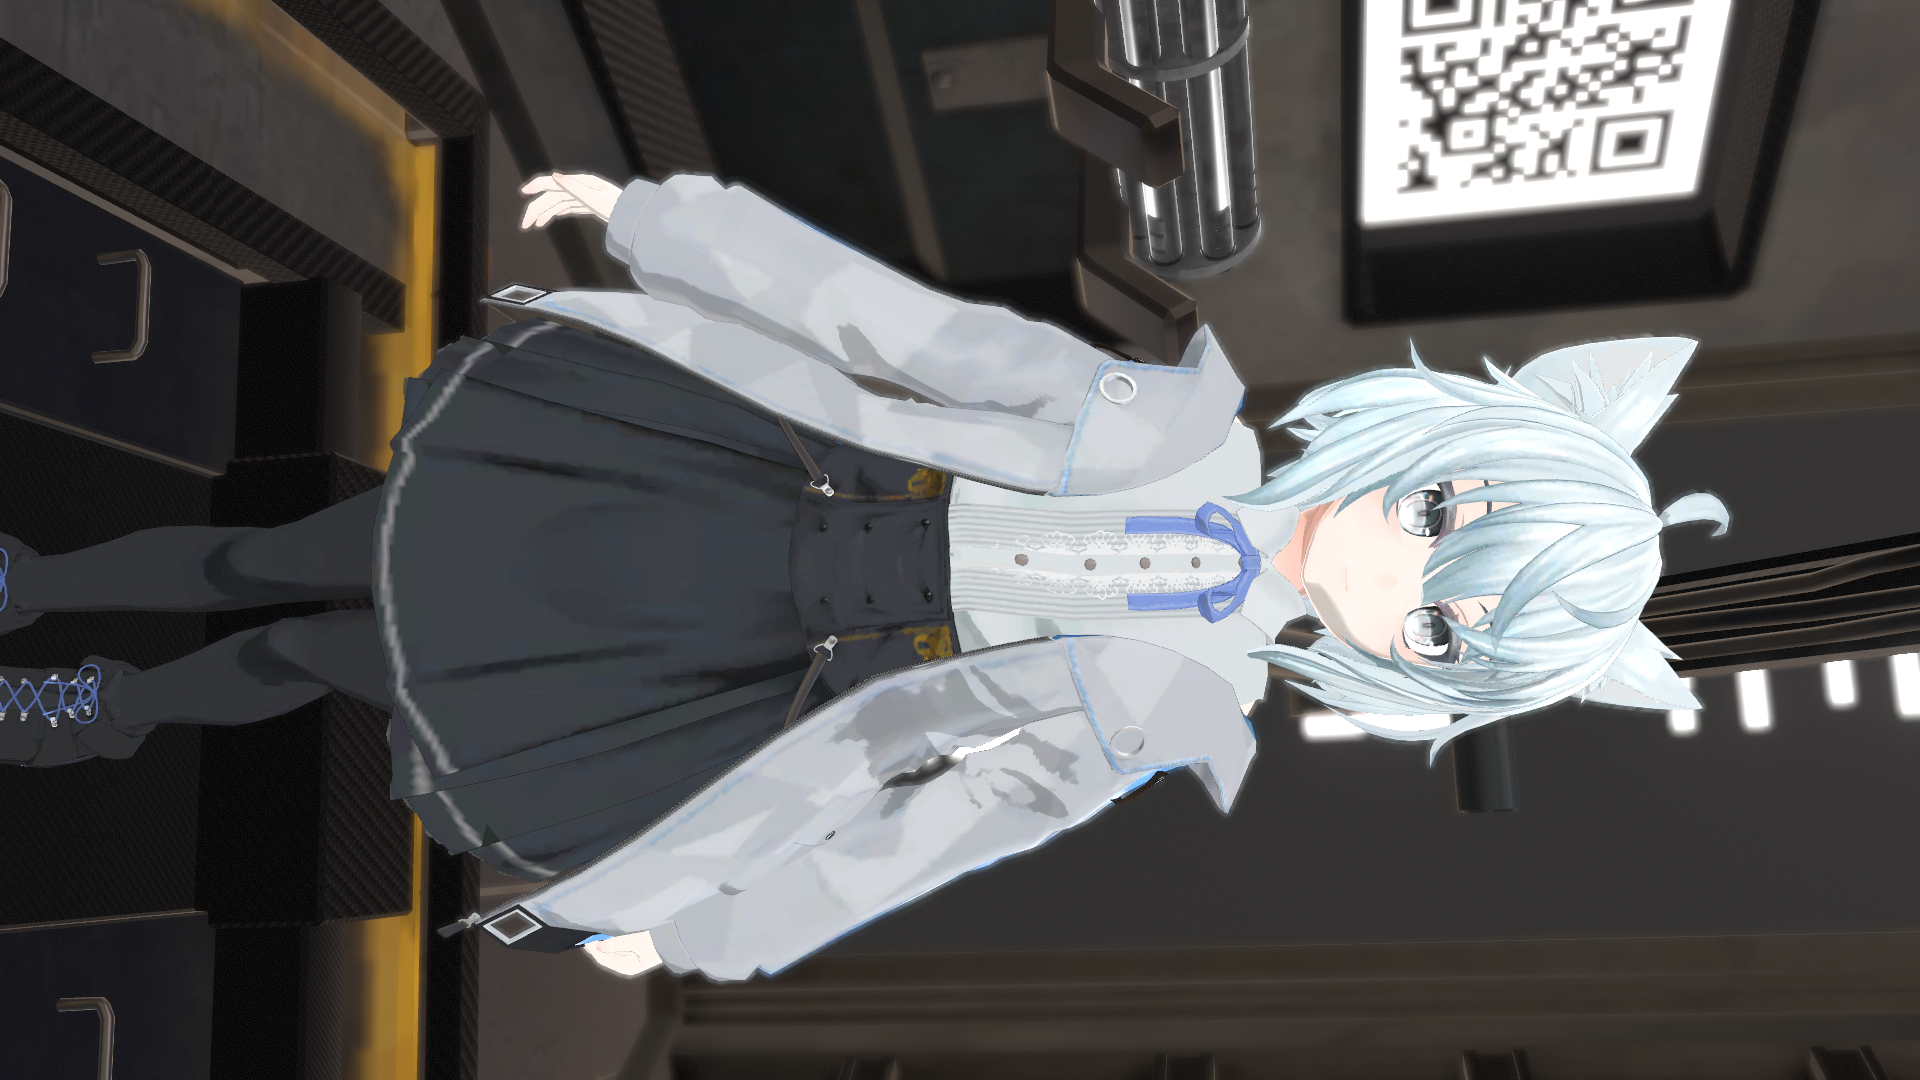 VRChat_1920x1080_2021-12-05_04-25-09.443.png